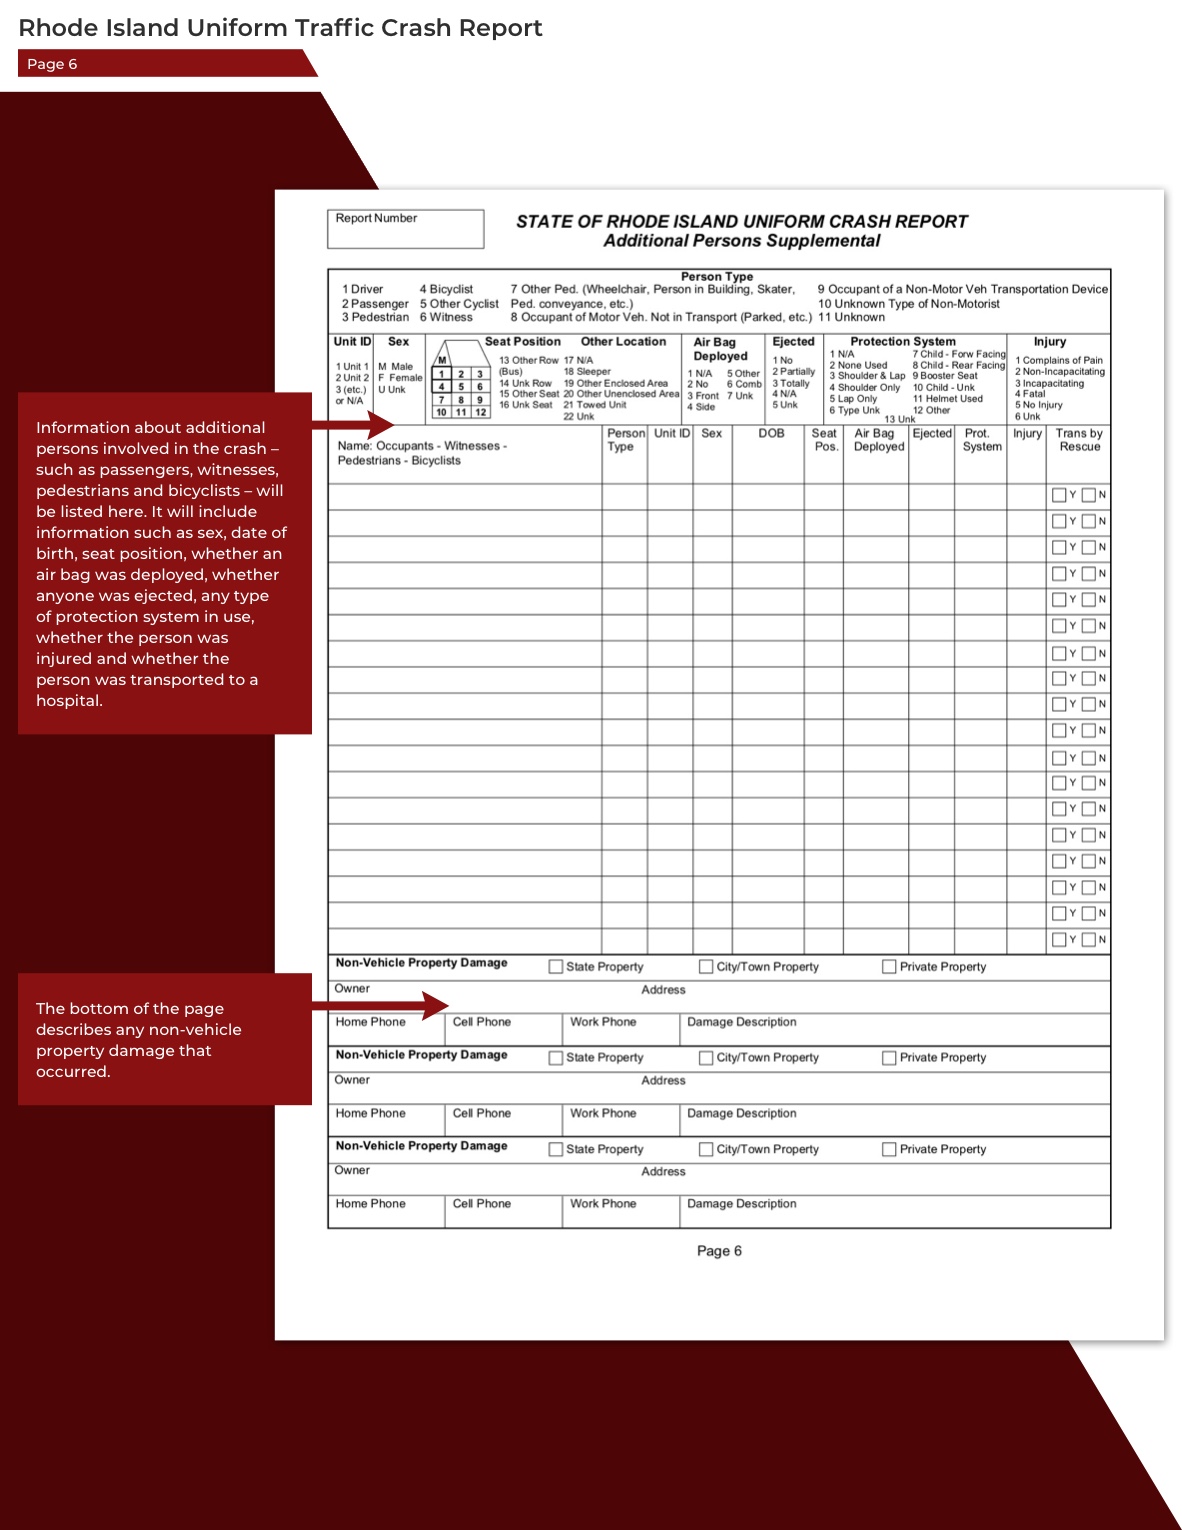 Rhode Island Accident Report page 6